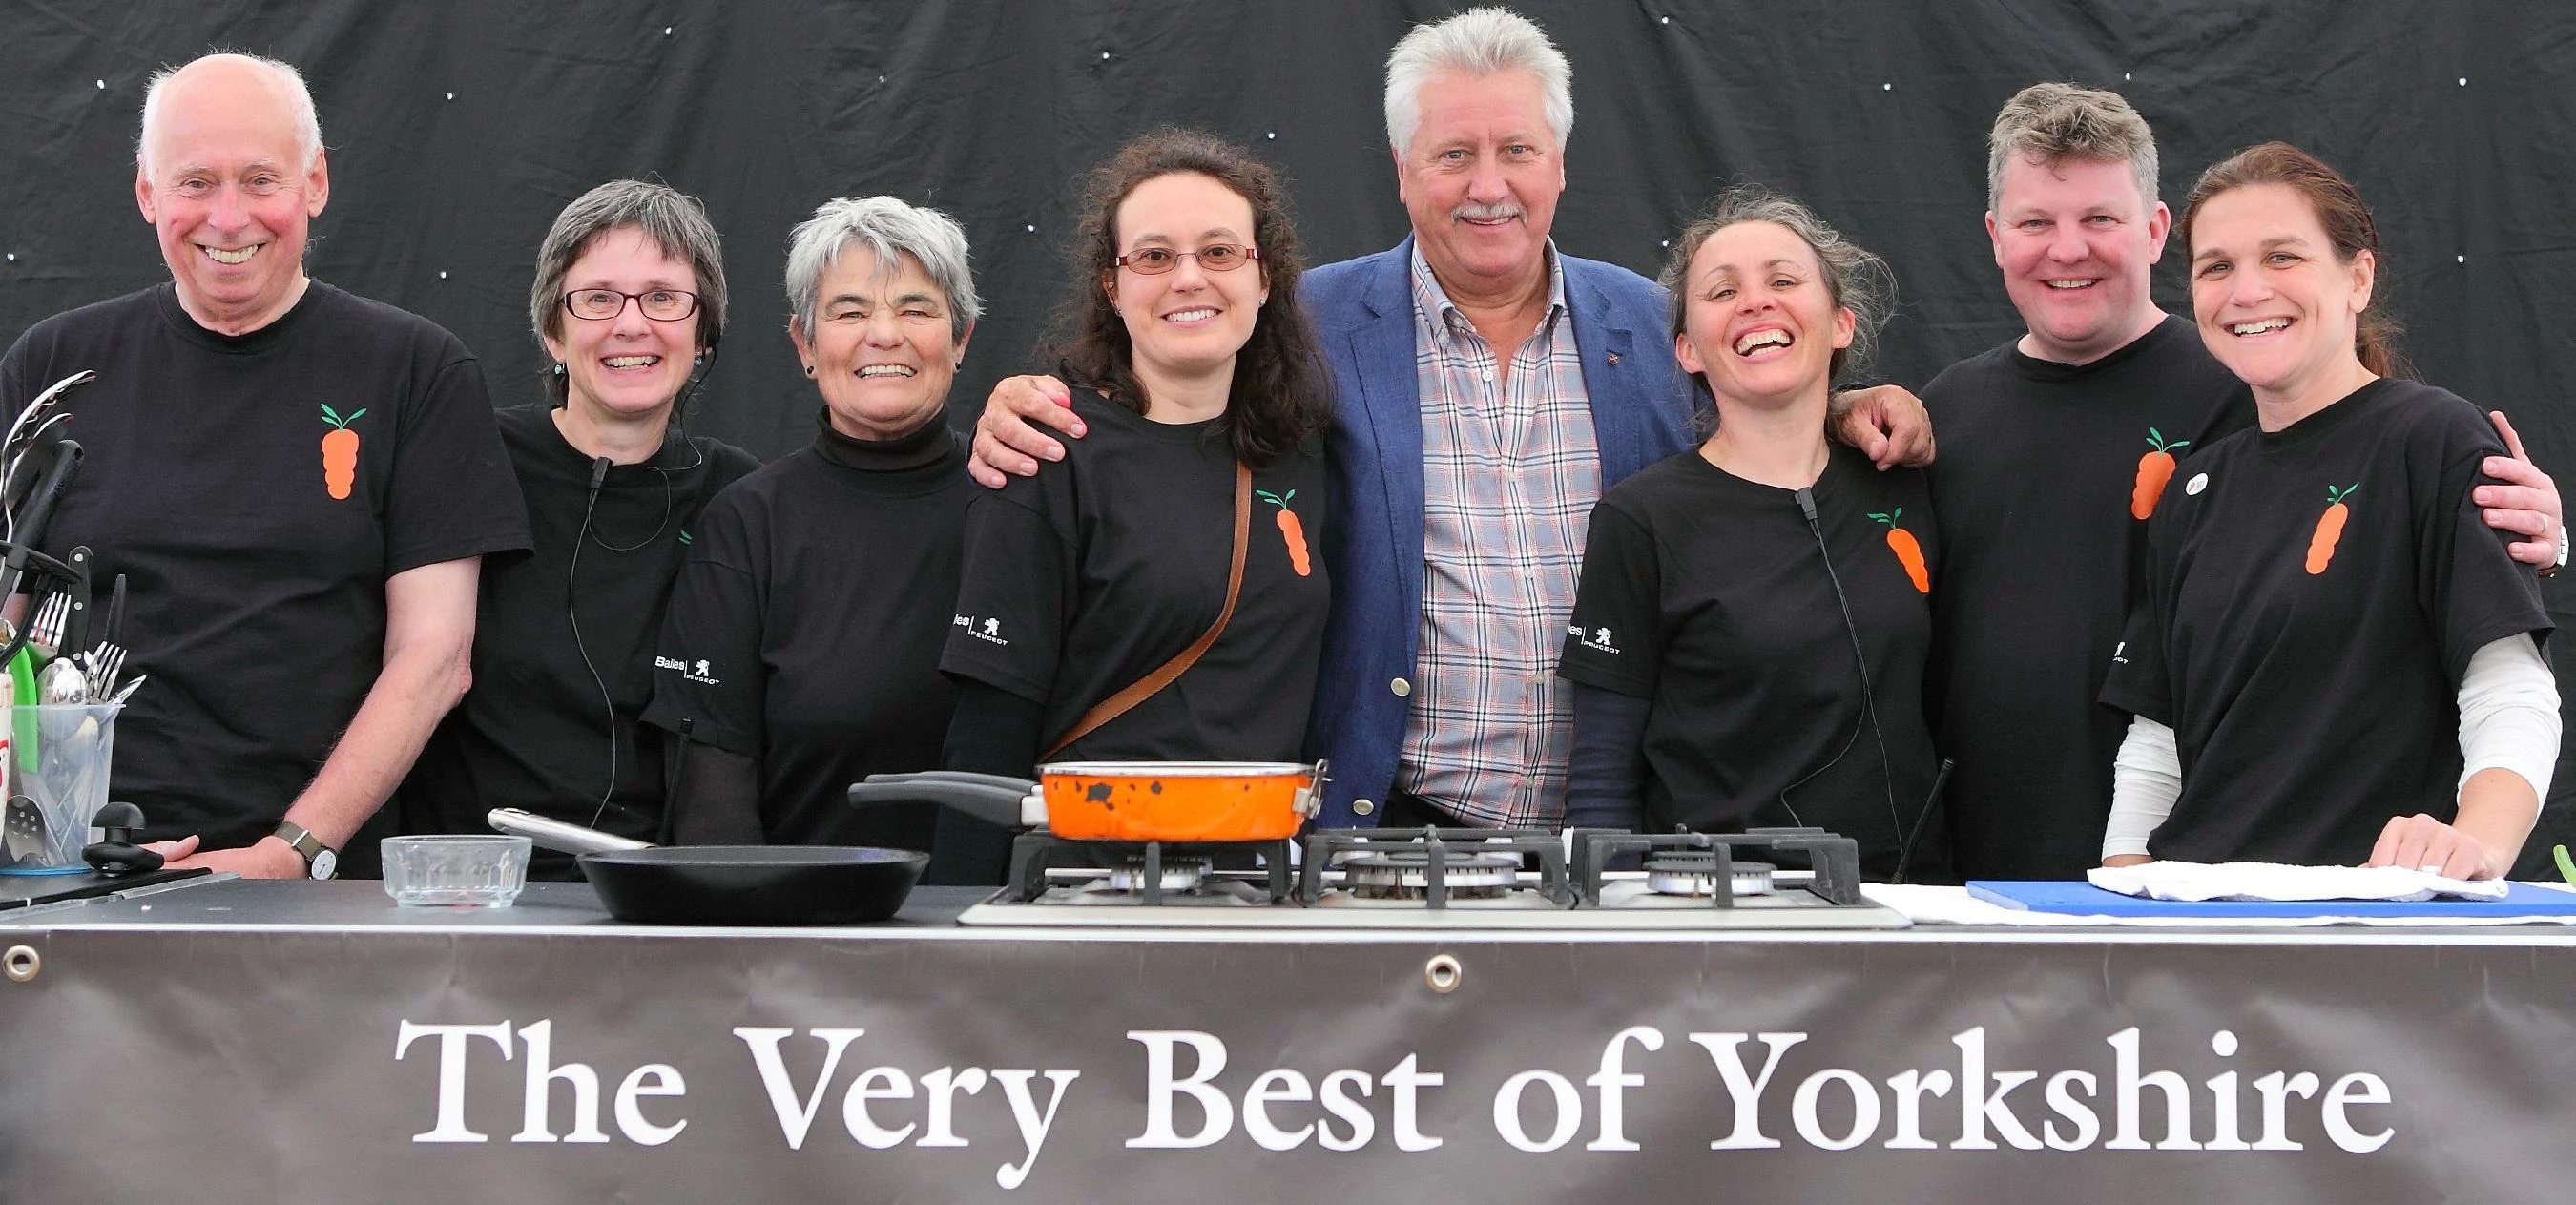 The Homegrown Festival committee with Brian Turner, who has attended the festival